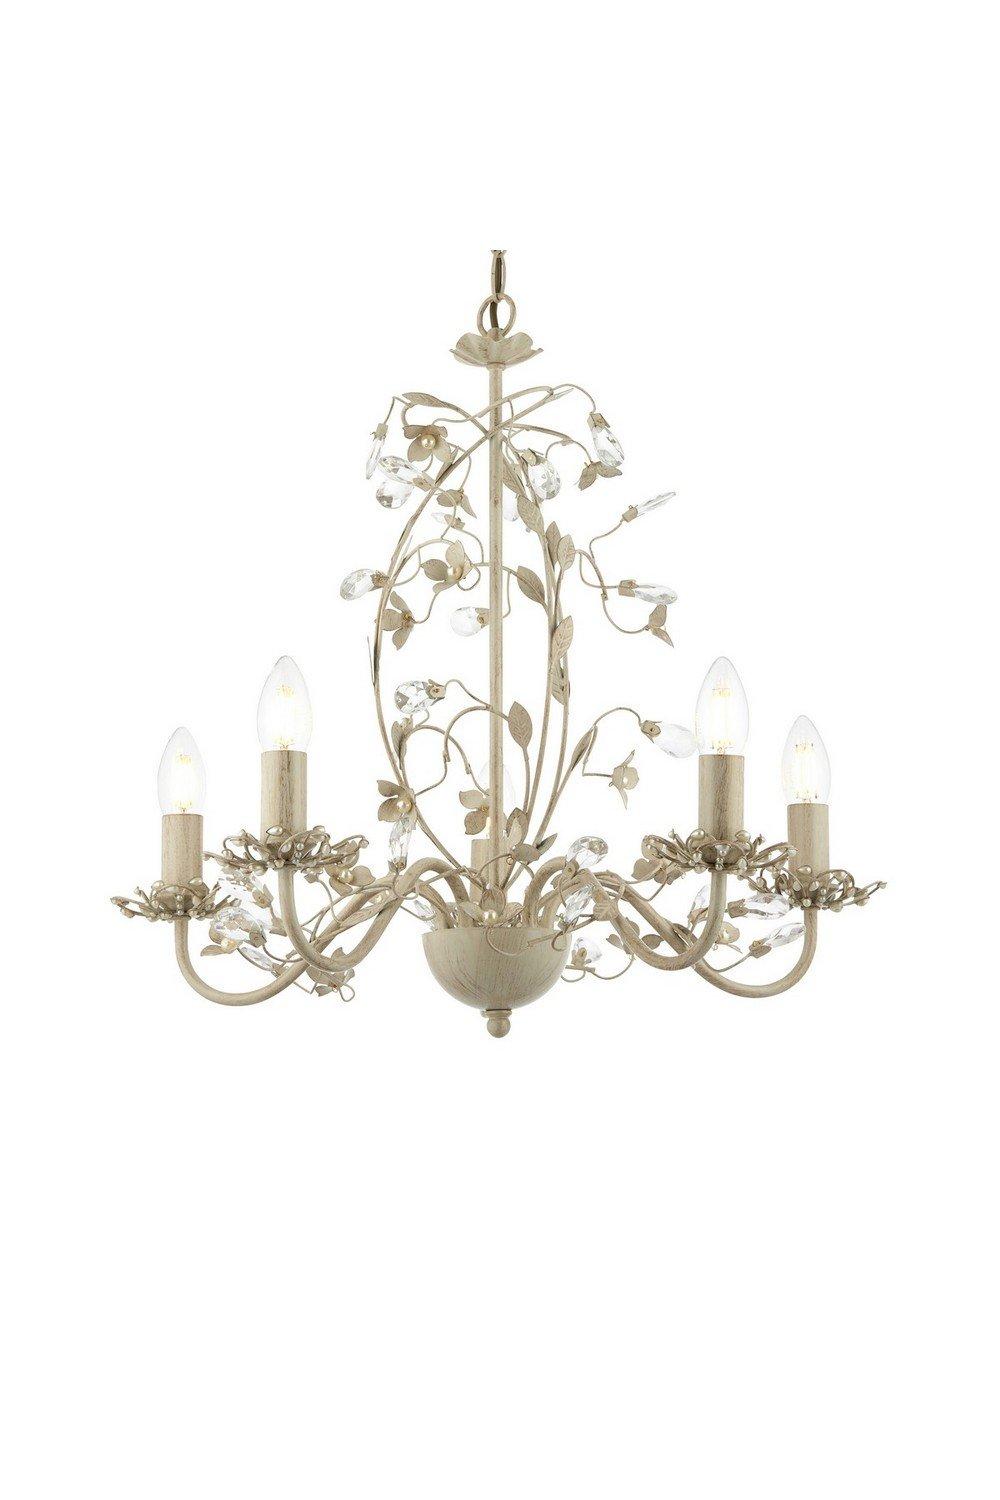 Lullaby 5 Light Multi Arm Ceiling Pendant Flower Design Cream With Brushed Gold Pearl Effect Acrylic